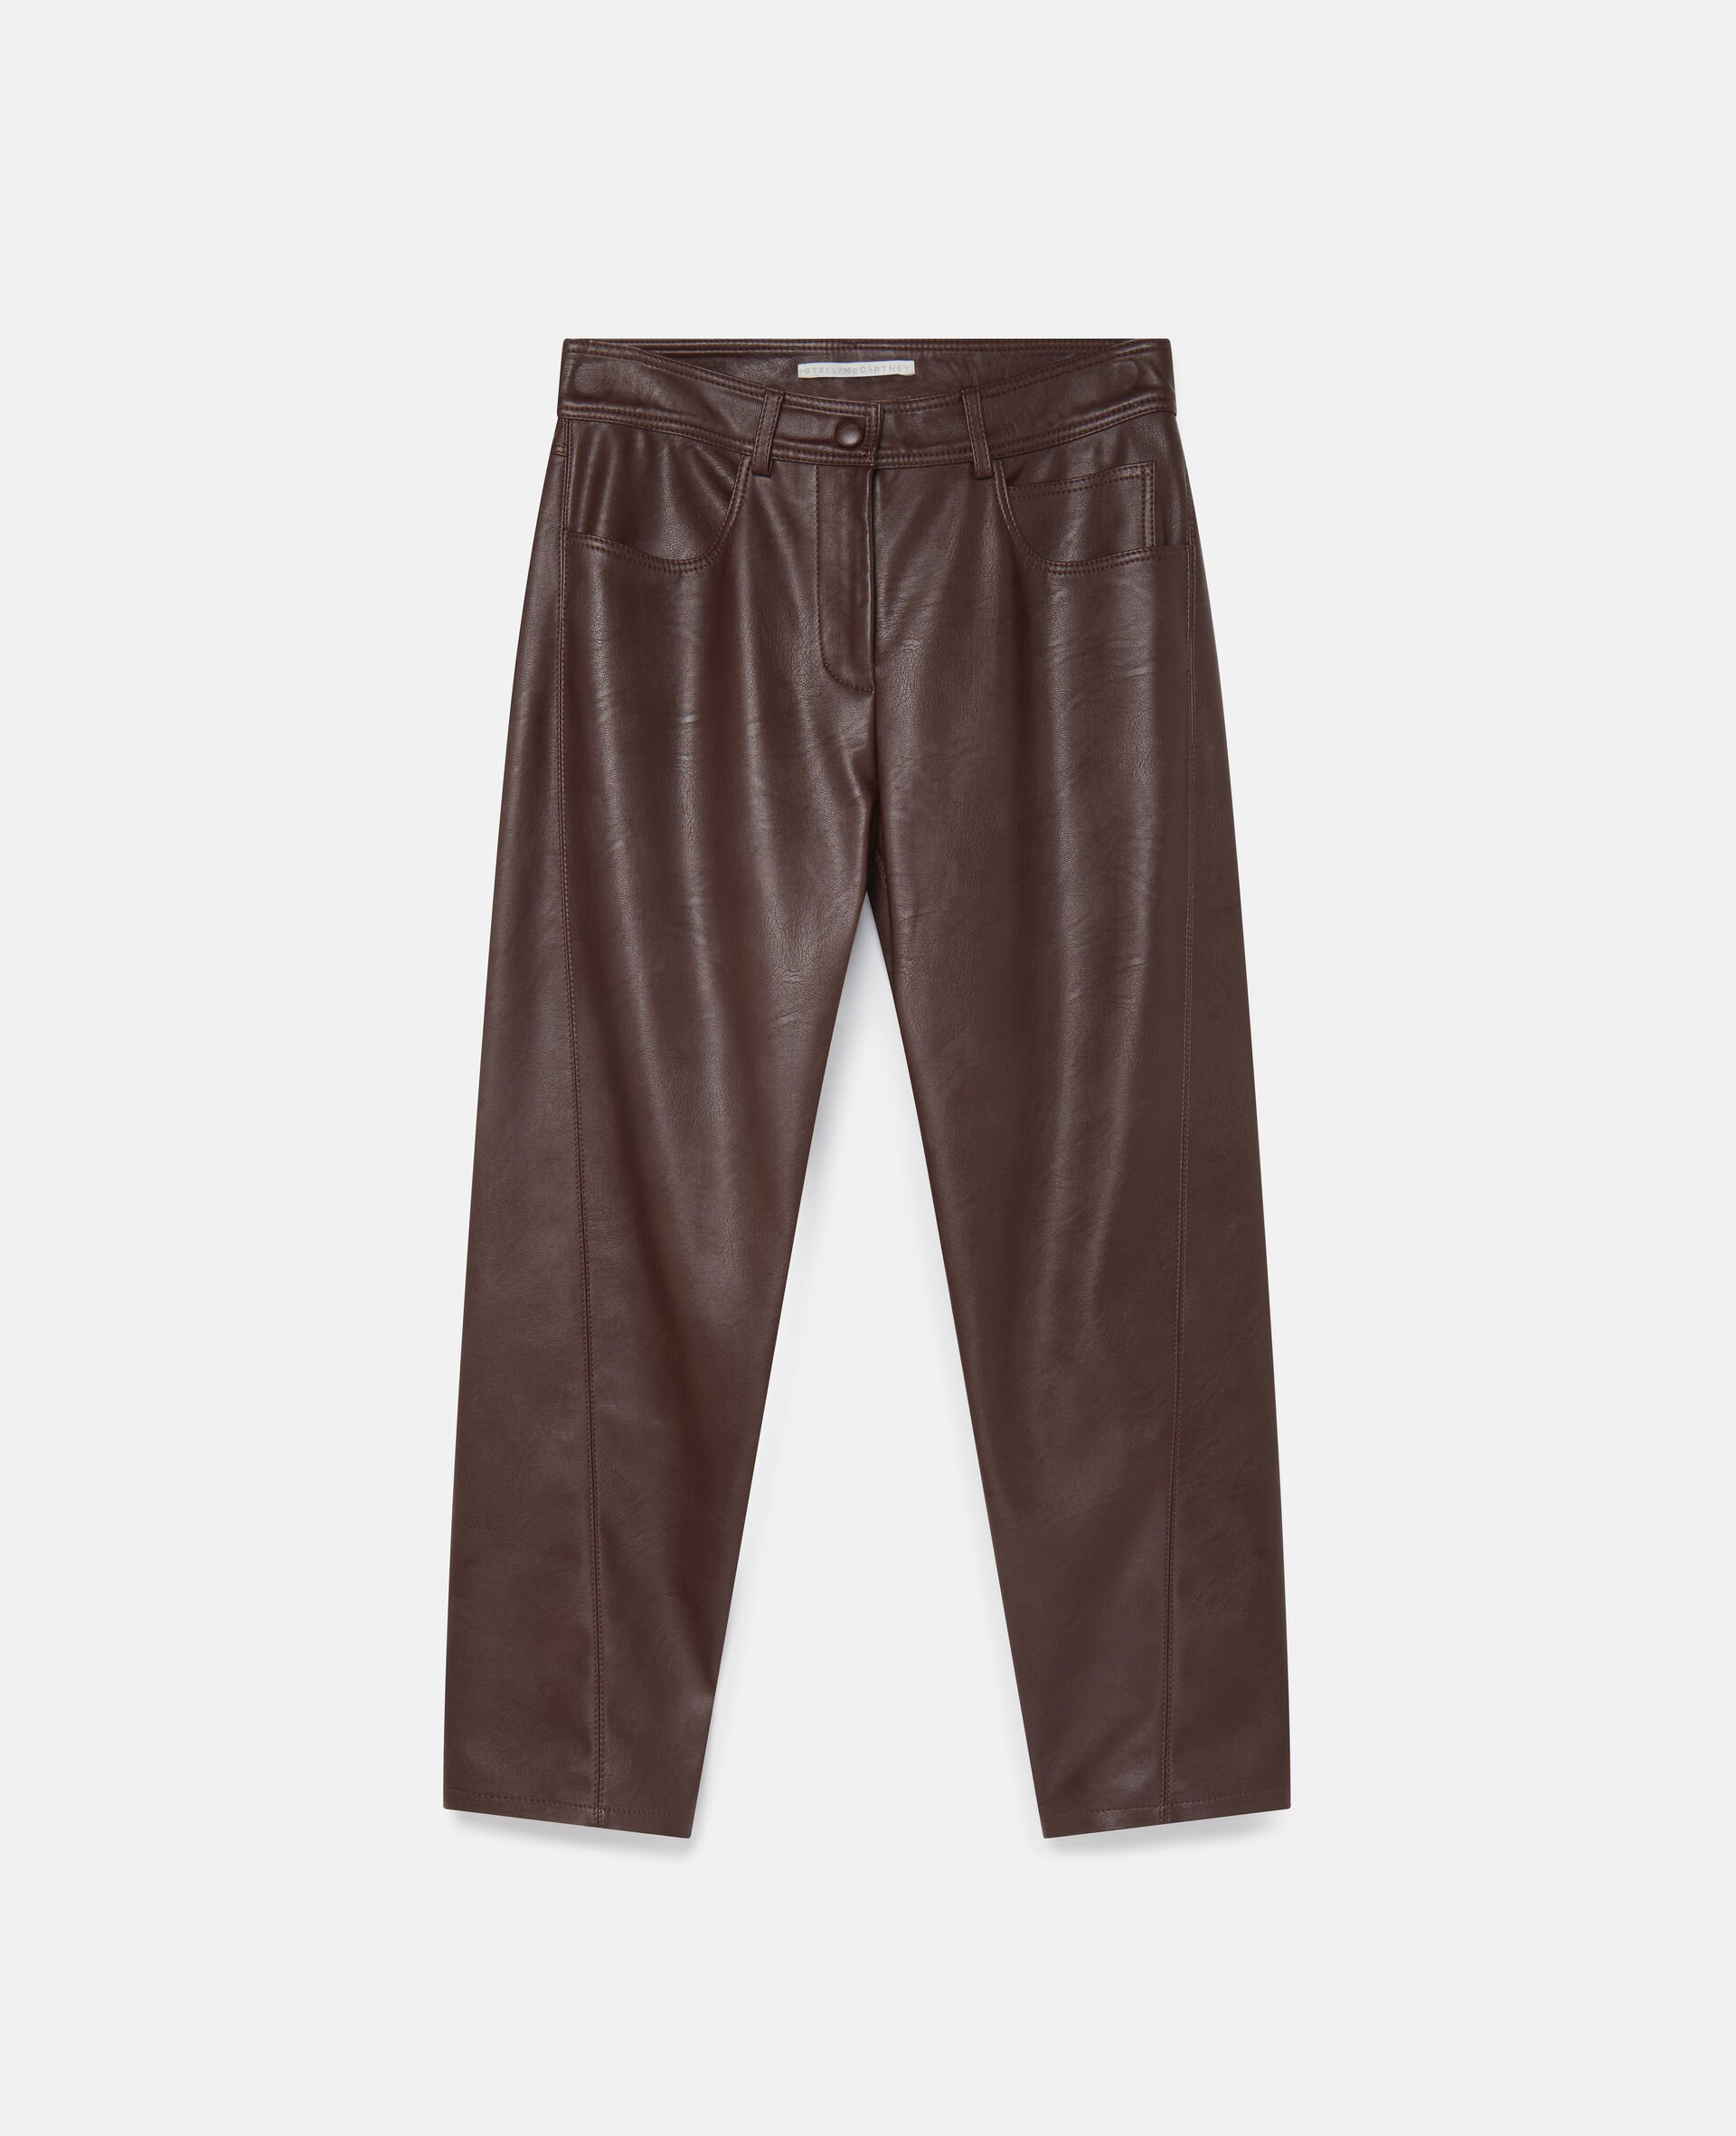 Alter Mat Stitch Trousers-Brown-large image number 0